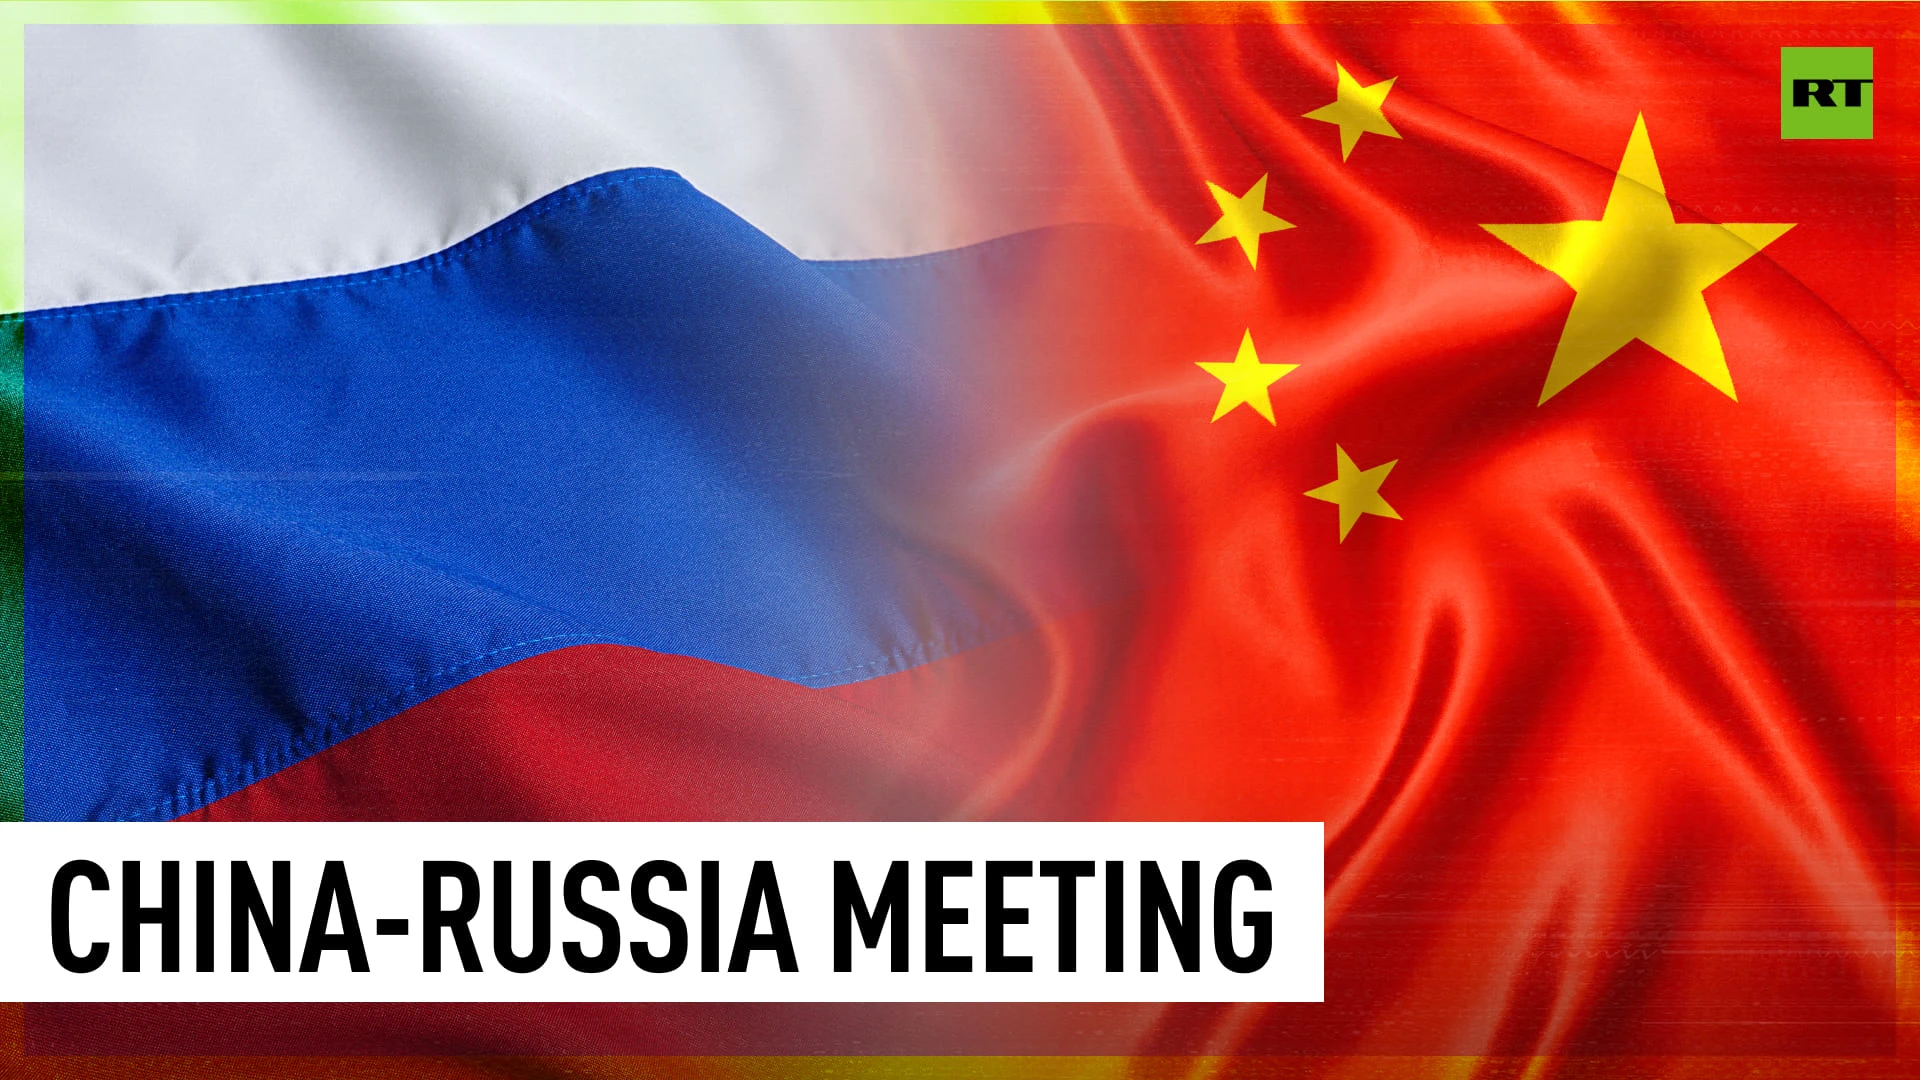 Russia-China cooperation is serious factor in stabilizing international situation – Putin